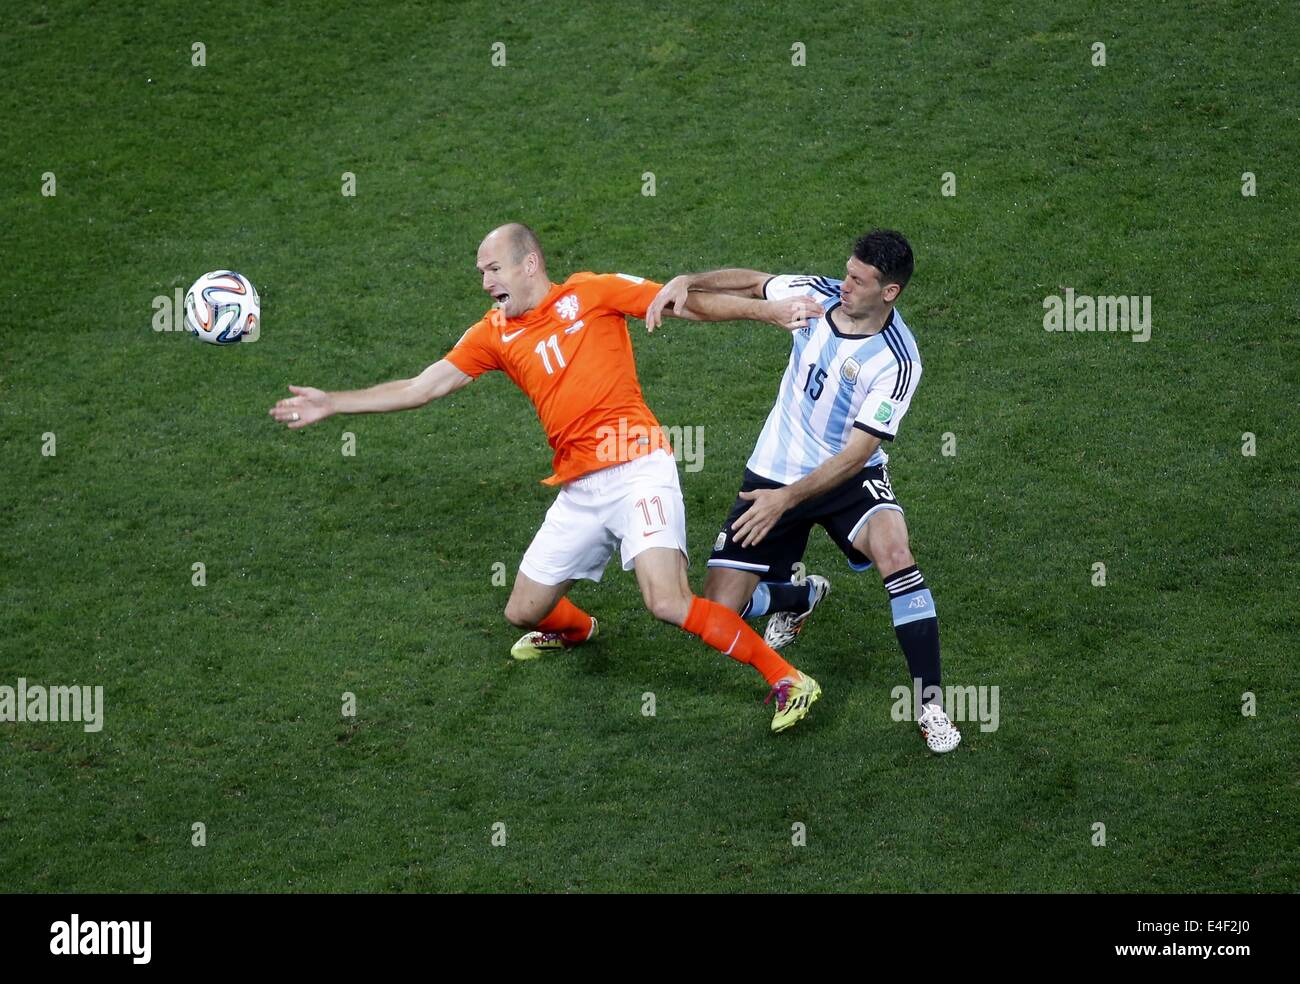 Sao Paulo, Brazil. 9th July, 2014. Netherlands' Arjen Robben vies with Argentina's Martin Demichelis during a semifinal match between Netherlands and Argentina of 2014 FIFA World Cup at the Arena de Sao Paulo Stadium in Sao Paulo, Brazil, on July 9, 2014. Credit:  Liao Yujie/Xinhua/Alamy Live News Stock Photo